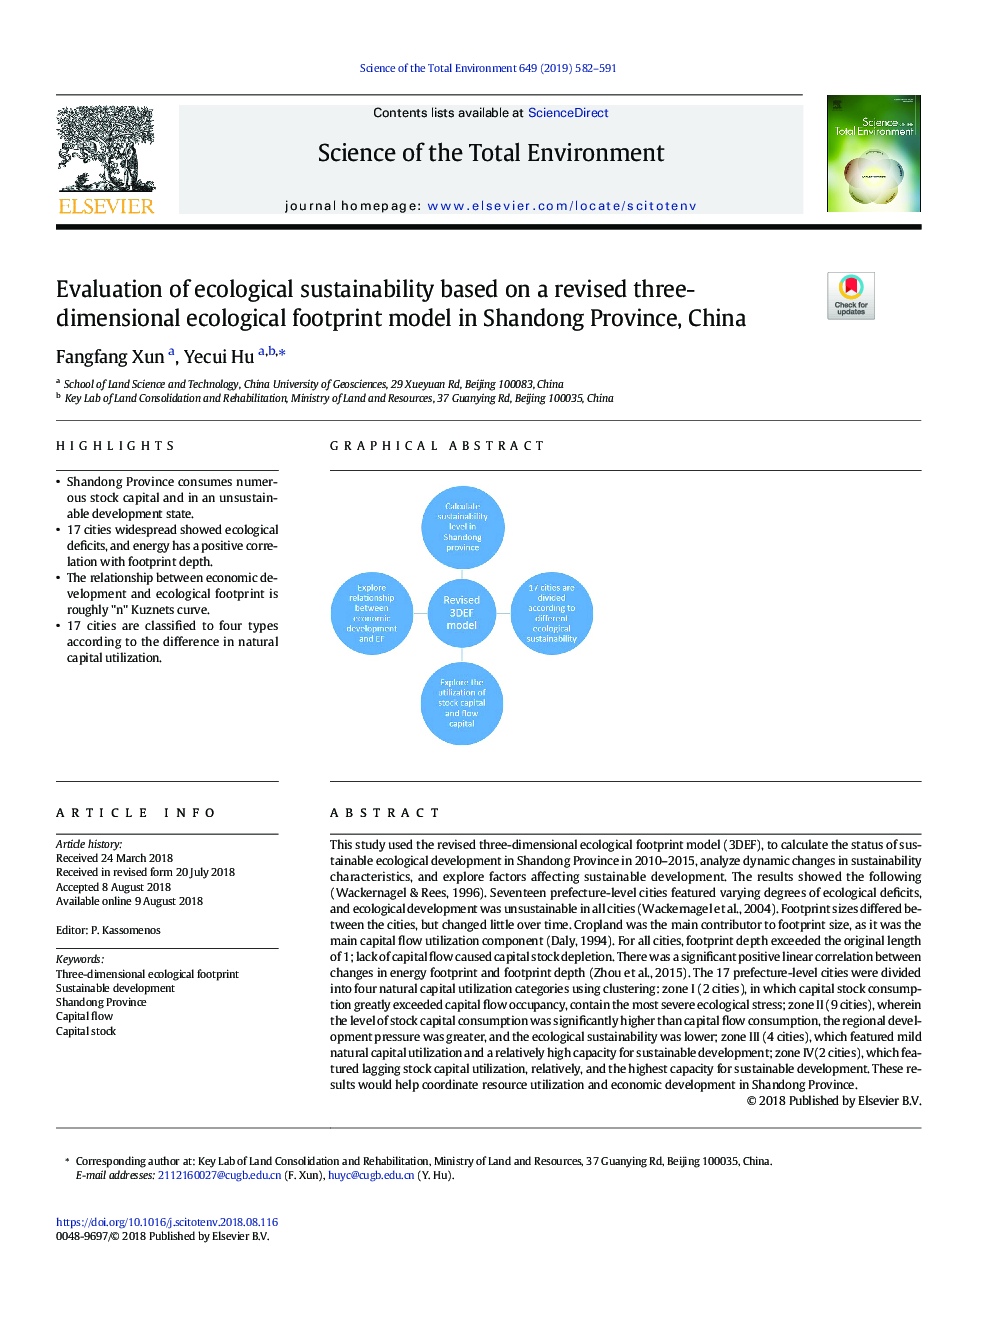 Evaluation of ecological sustainability based on a revised three-dimensional ecological footprint model in Shandong Province, China